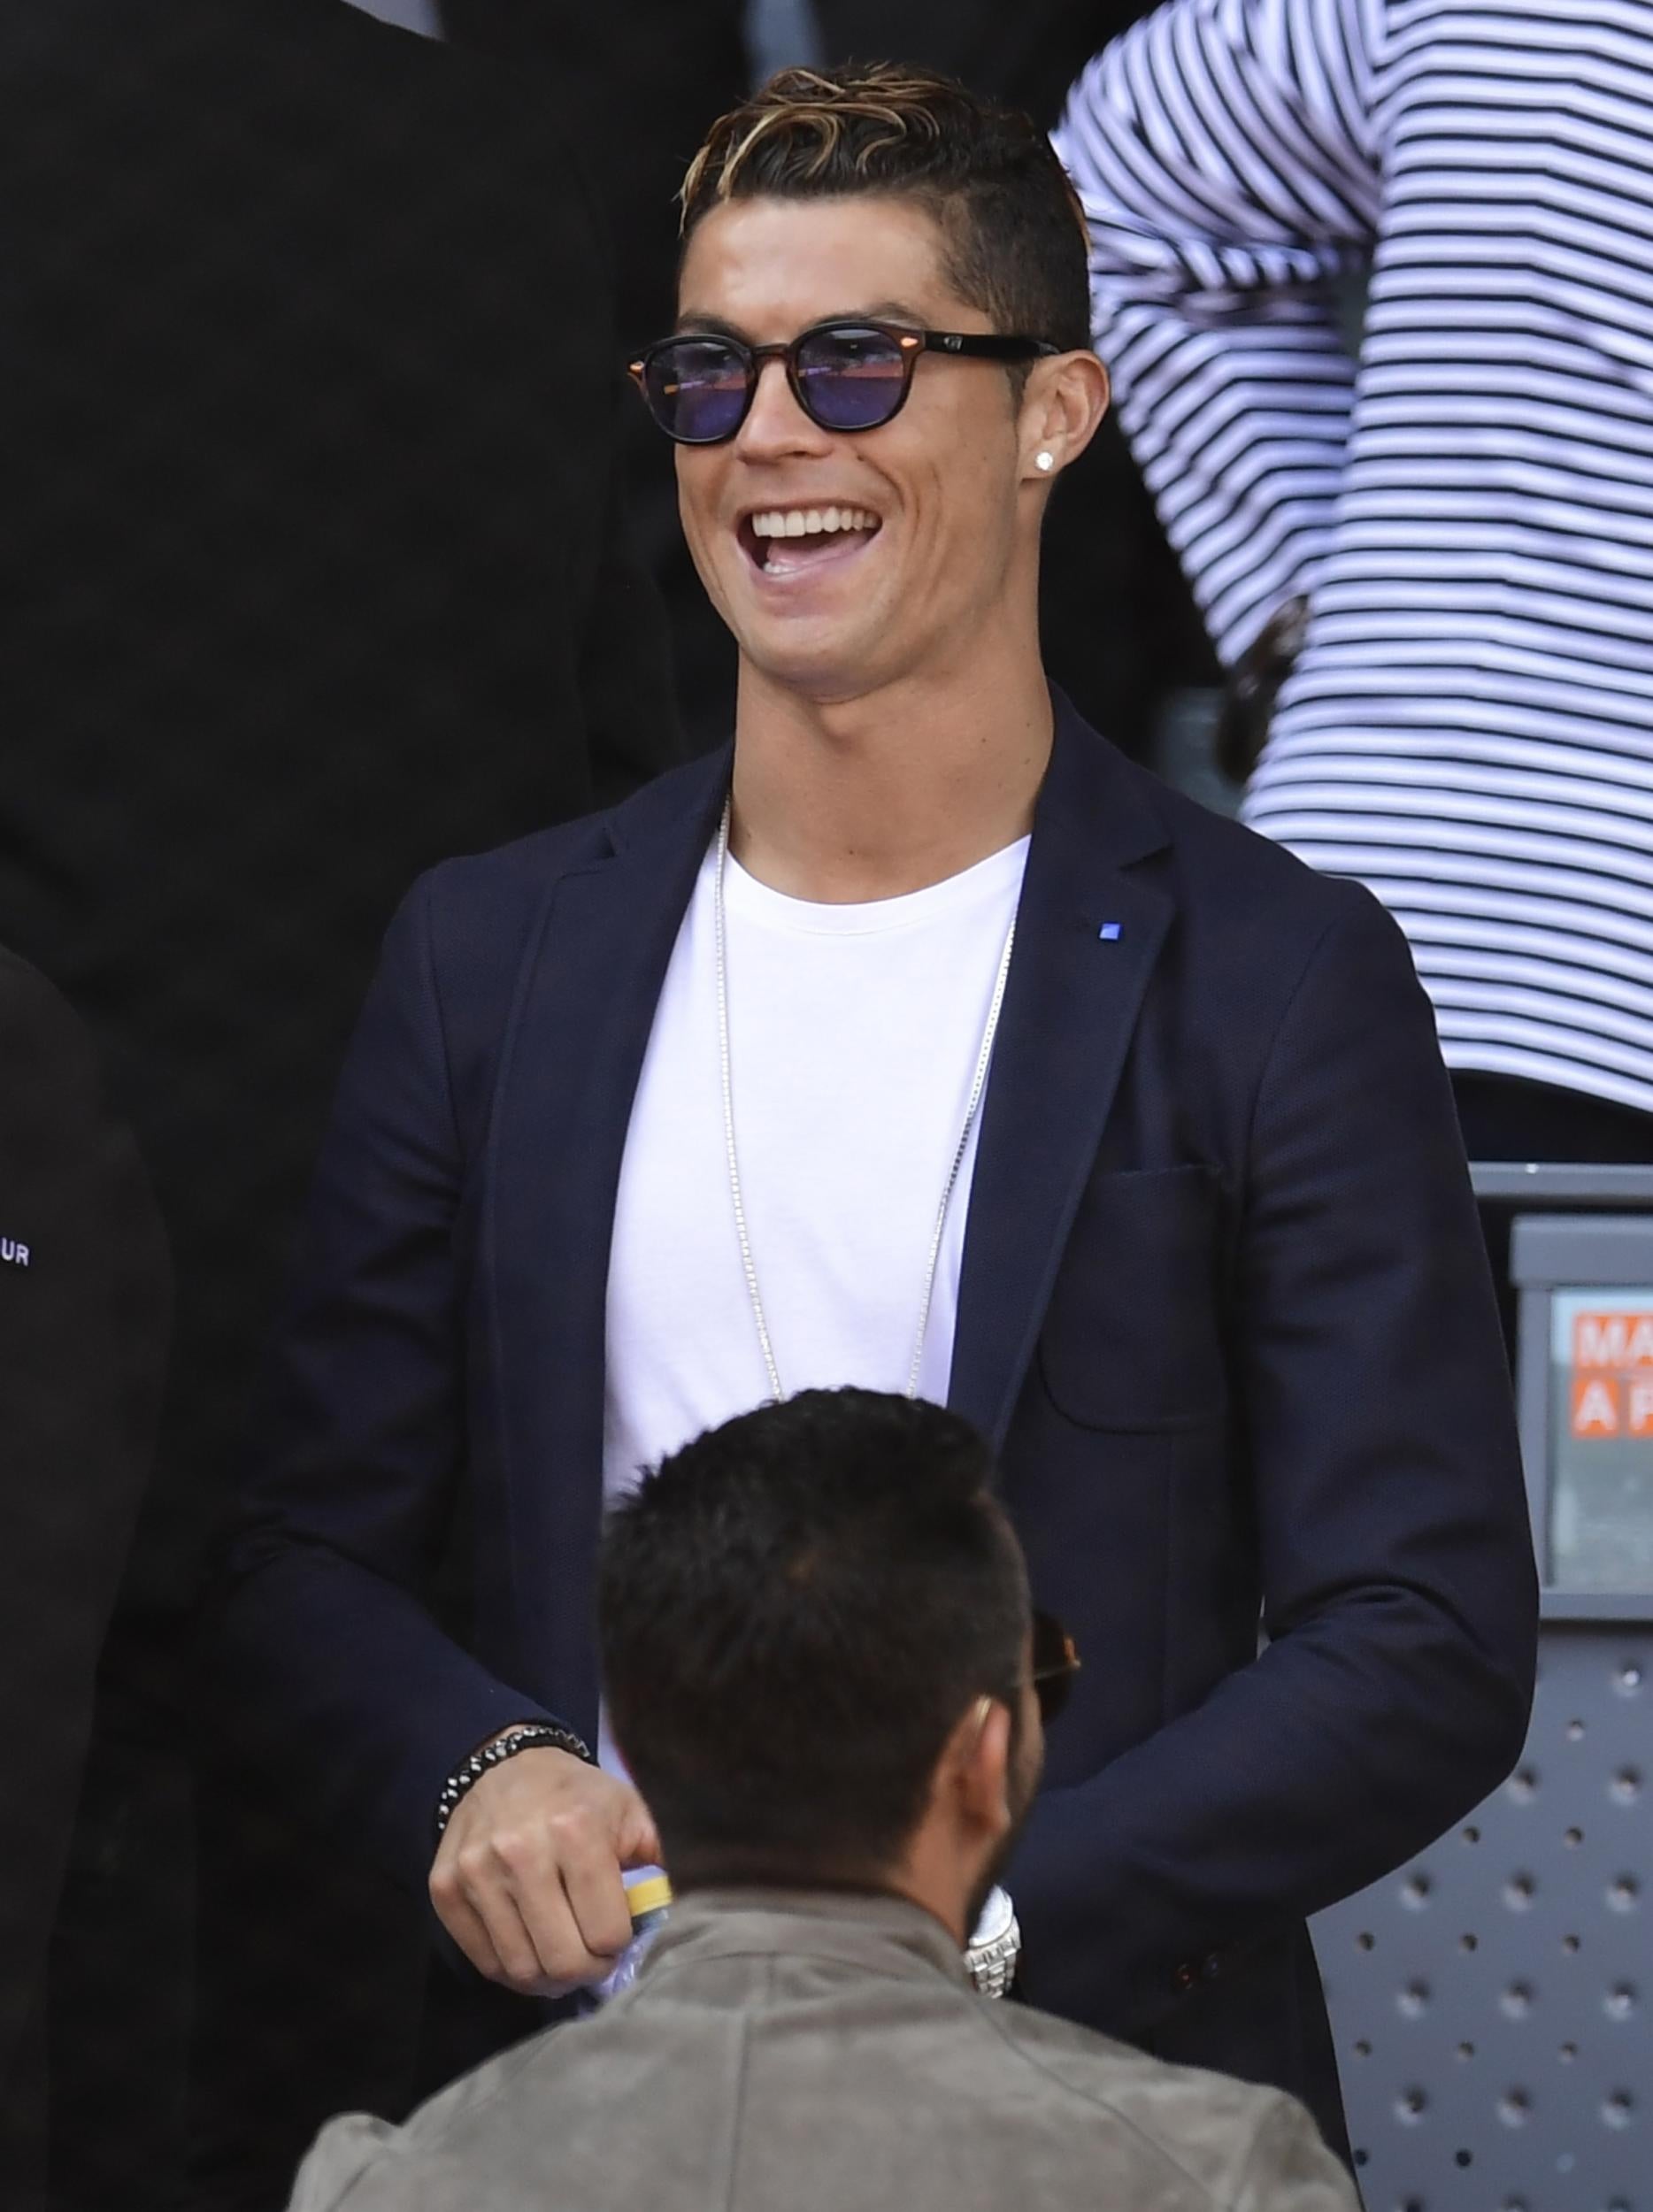 Ronaldo was in the crowd to watch Nadal's victory